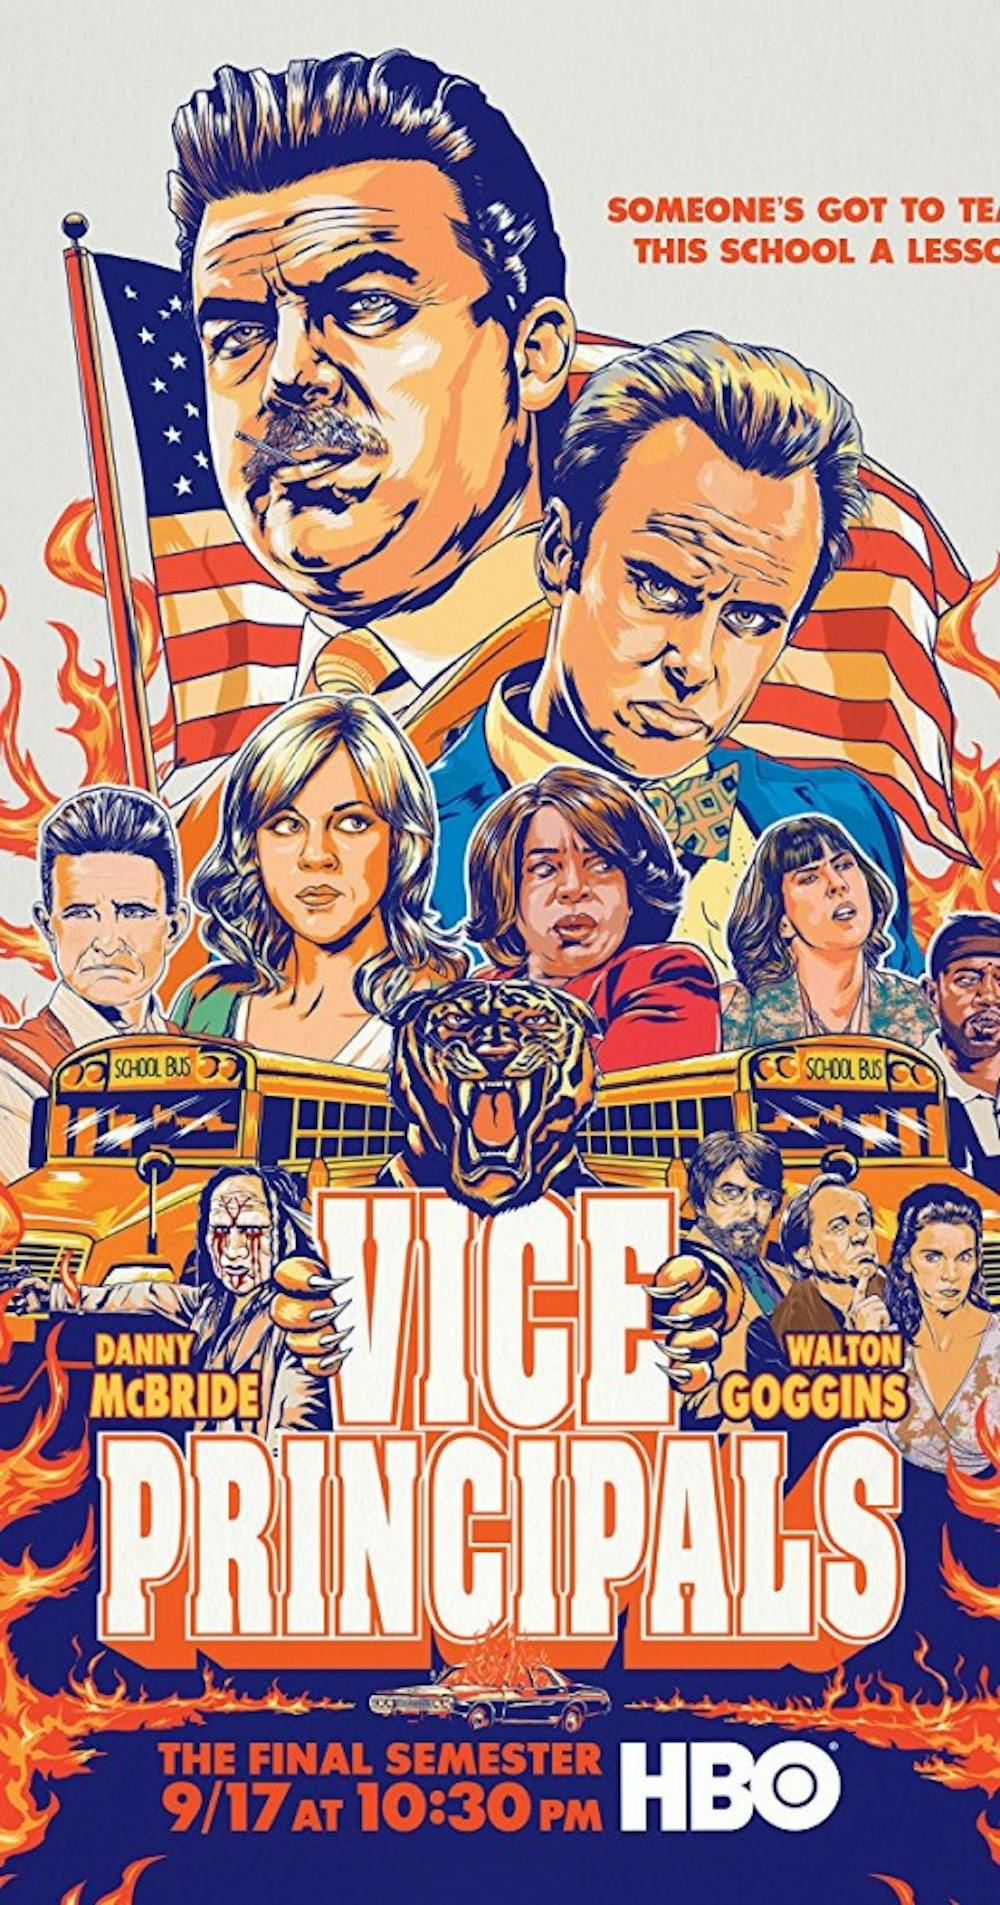 <p>If the premiere is any indication, fans of "Vice Principals" will still have plenty of fun watching Gamby return to his usual antics in the new season.</p>